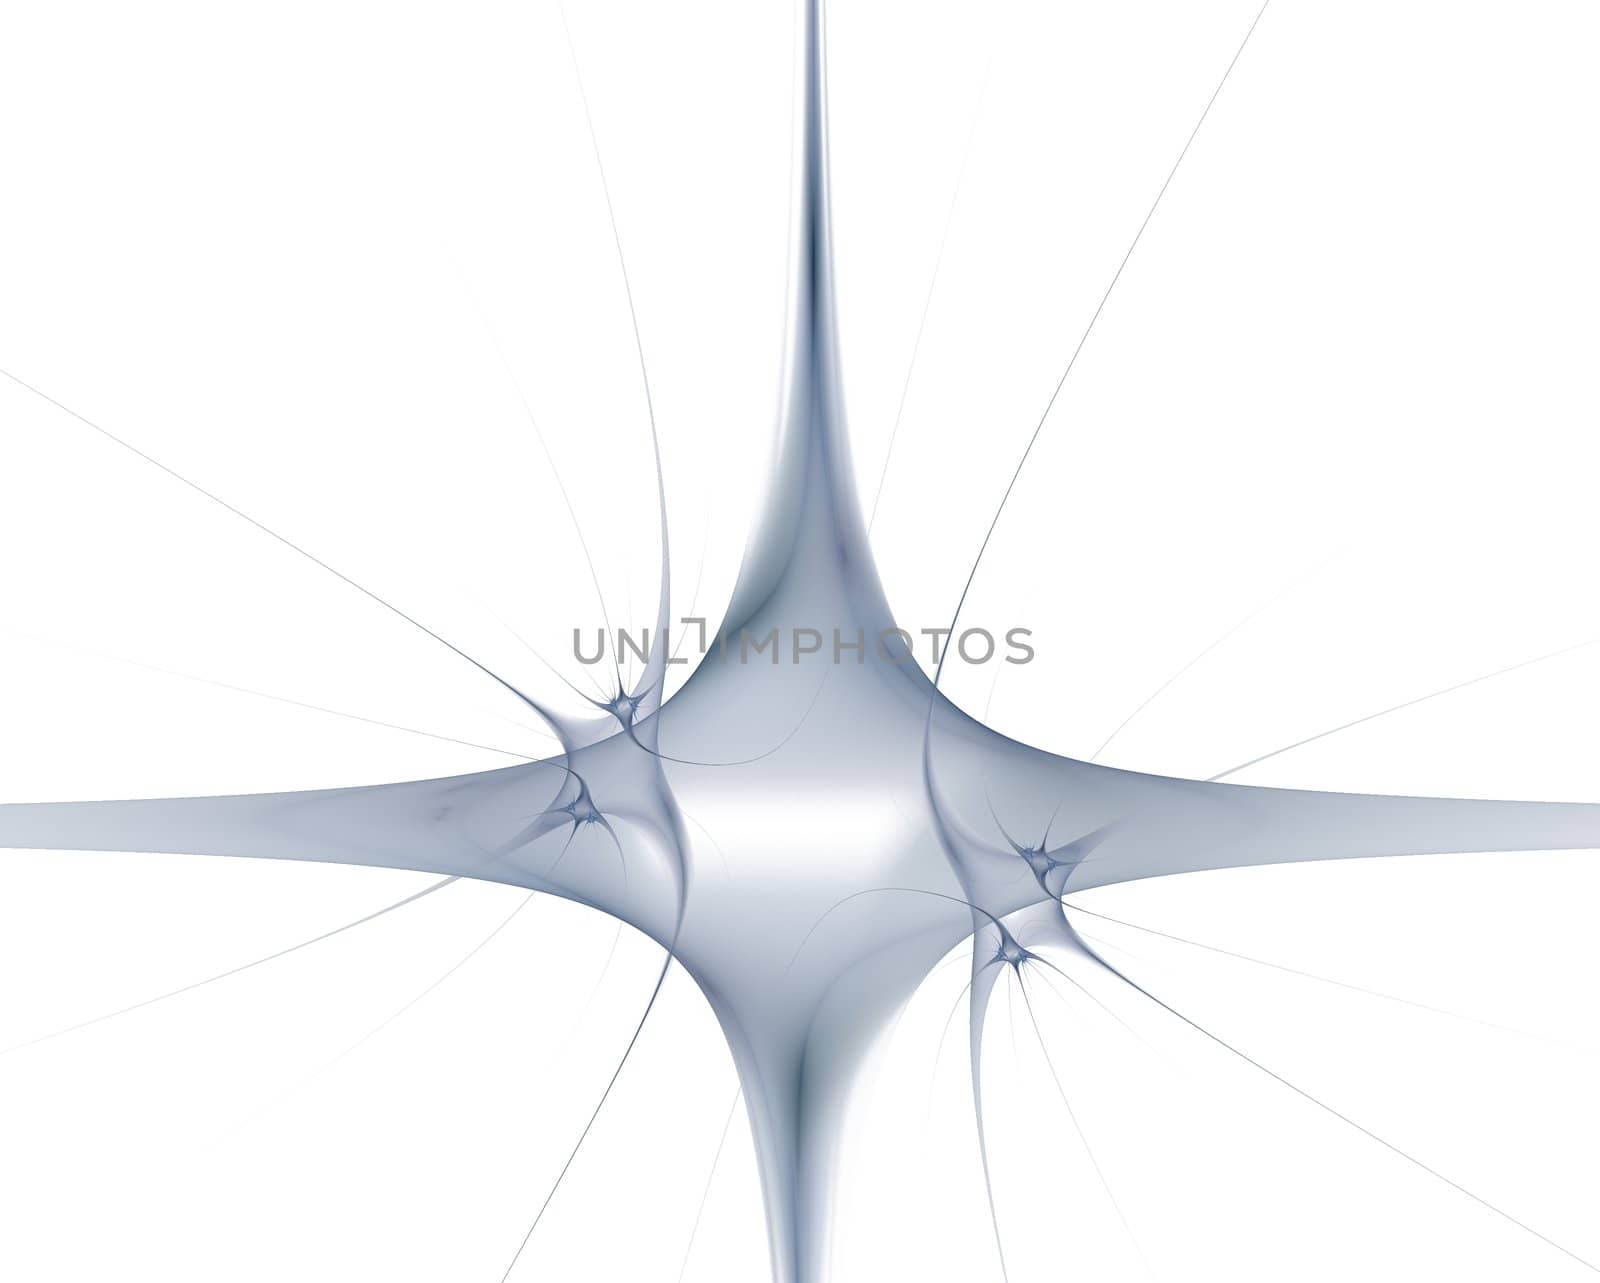 Abstract figure like tentacles on a white background